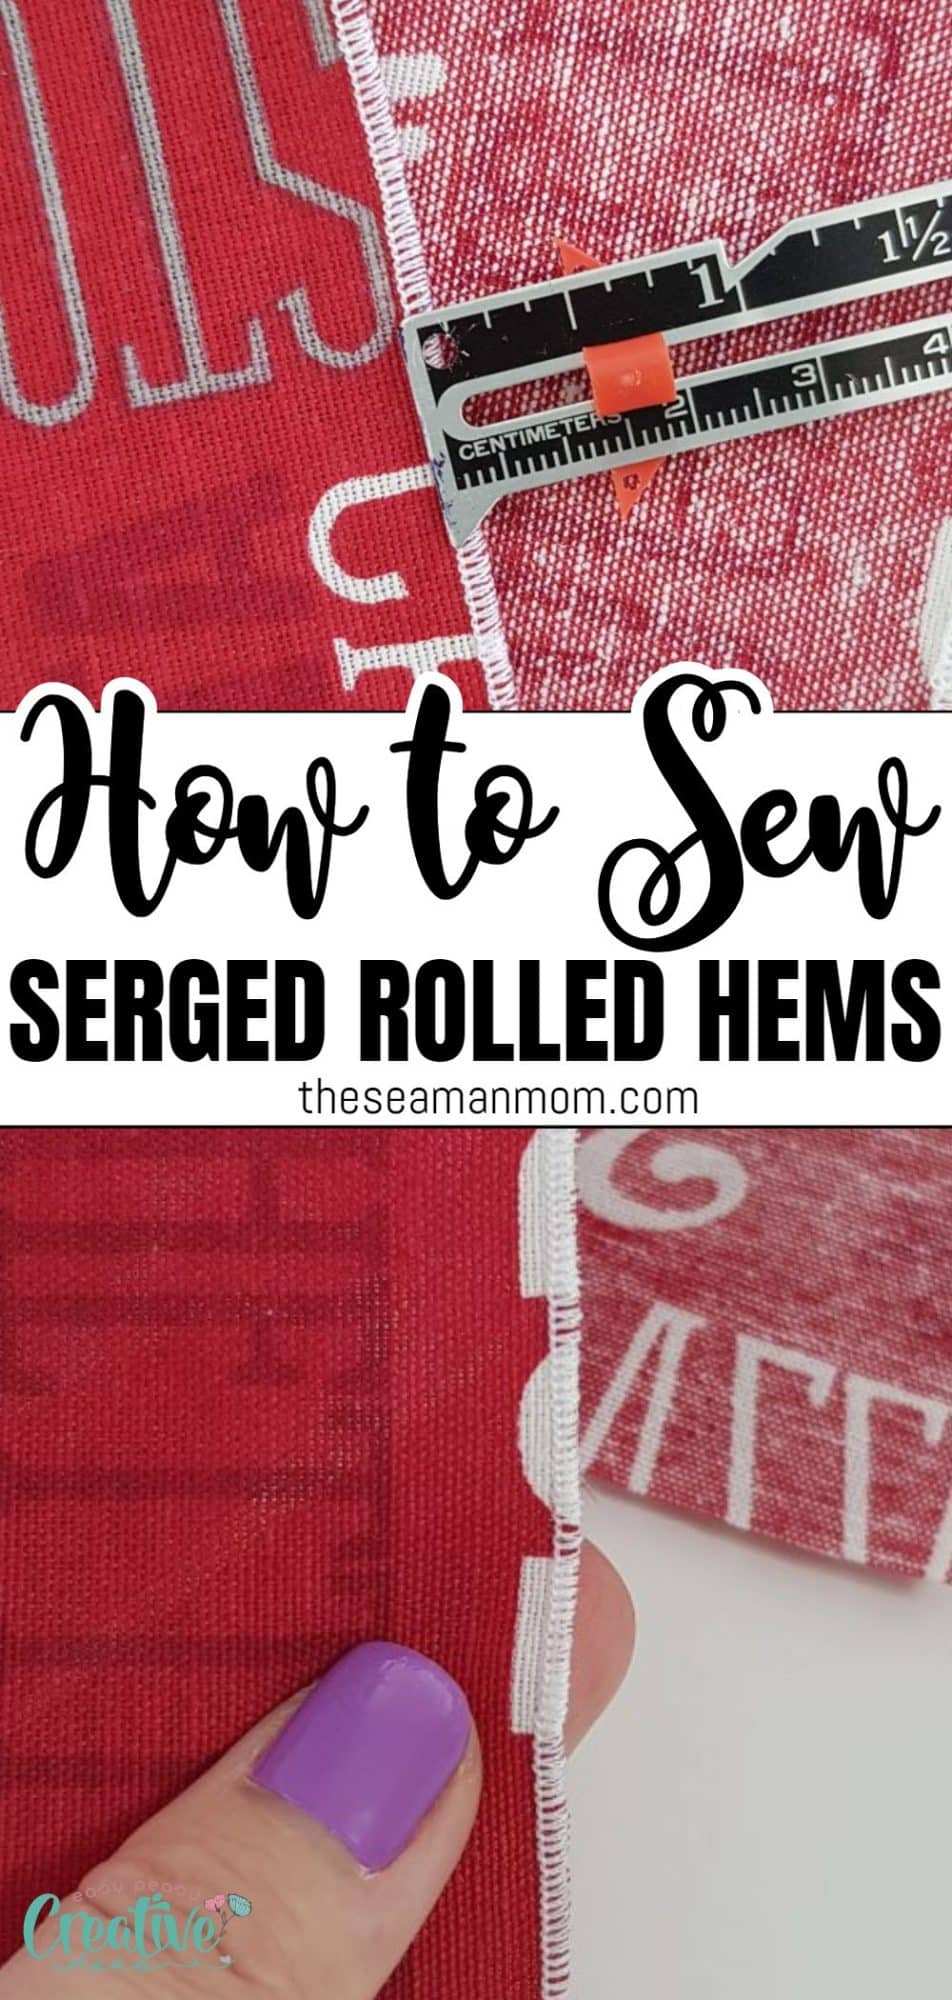 How to sew a serged rolled hem